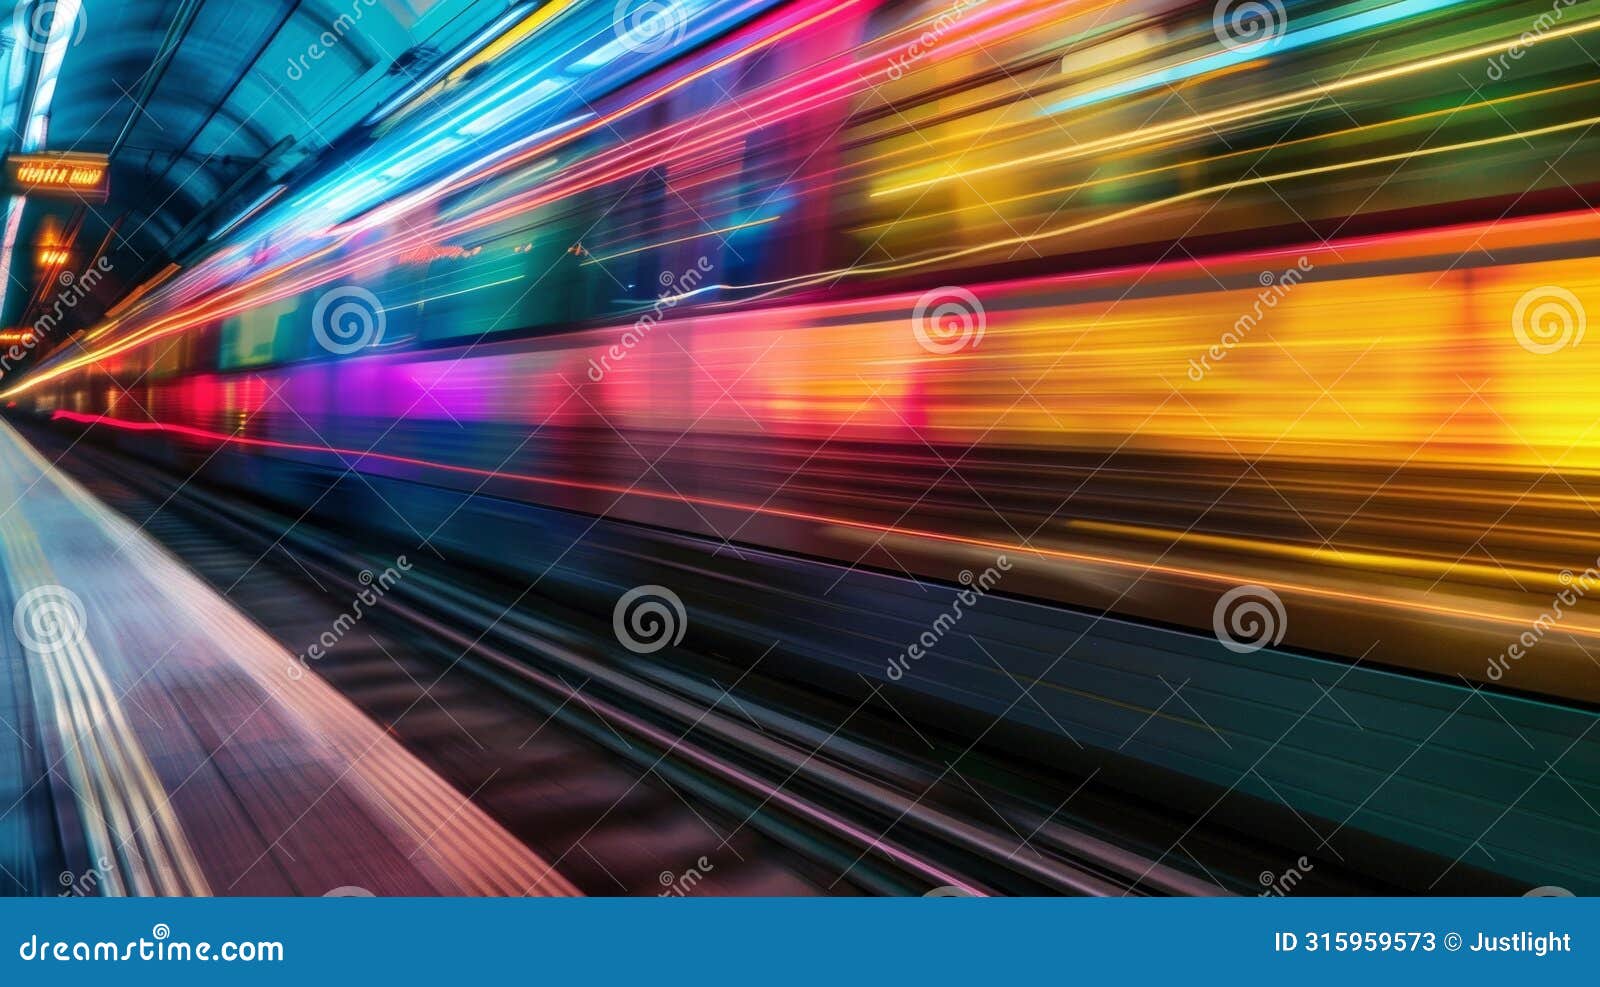 a train whizzing by on the tracks its carts a blur of colors and passengers gazing out the windows in fascination as